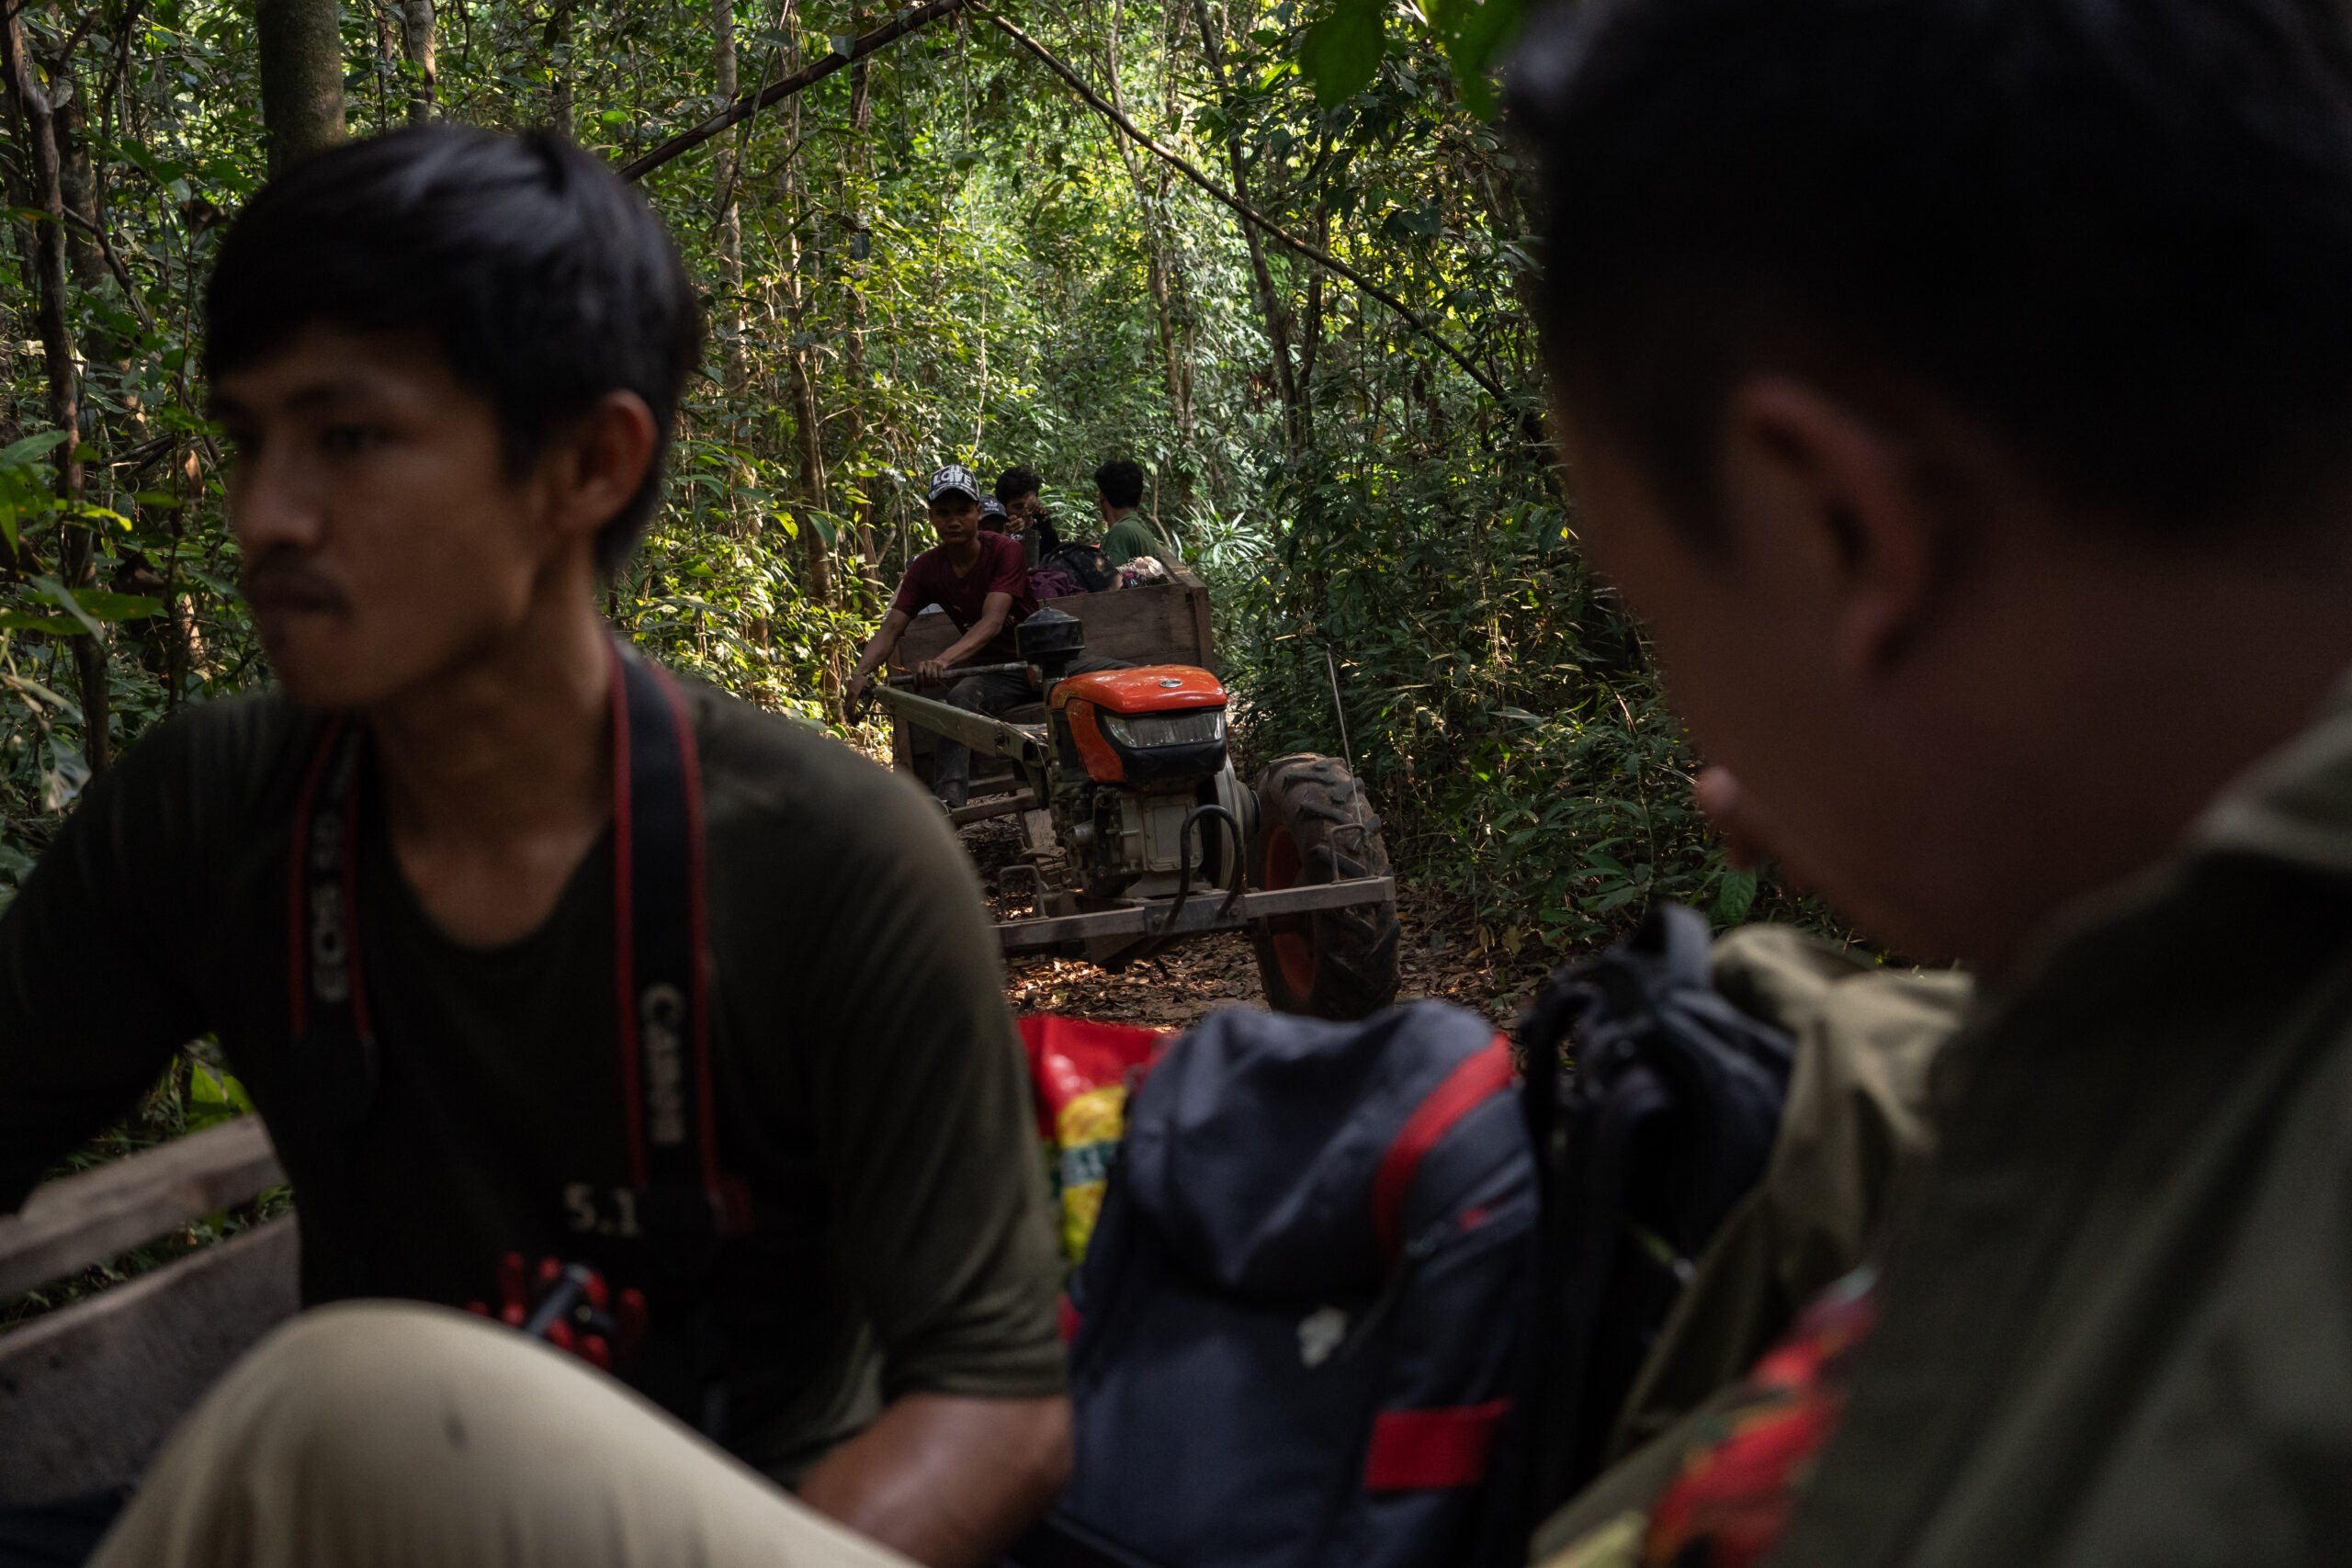 San Mala and the Prey Preah Roka Community Network were escorted out of the forest - along with Mongabay reporters - by Ministry of Environment rangers in April 2023. Image by Andy Ball / Mongabay.